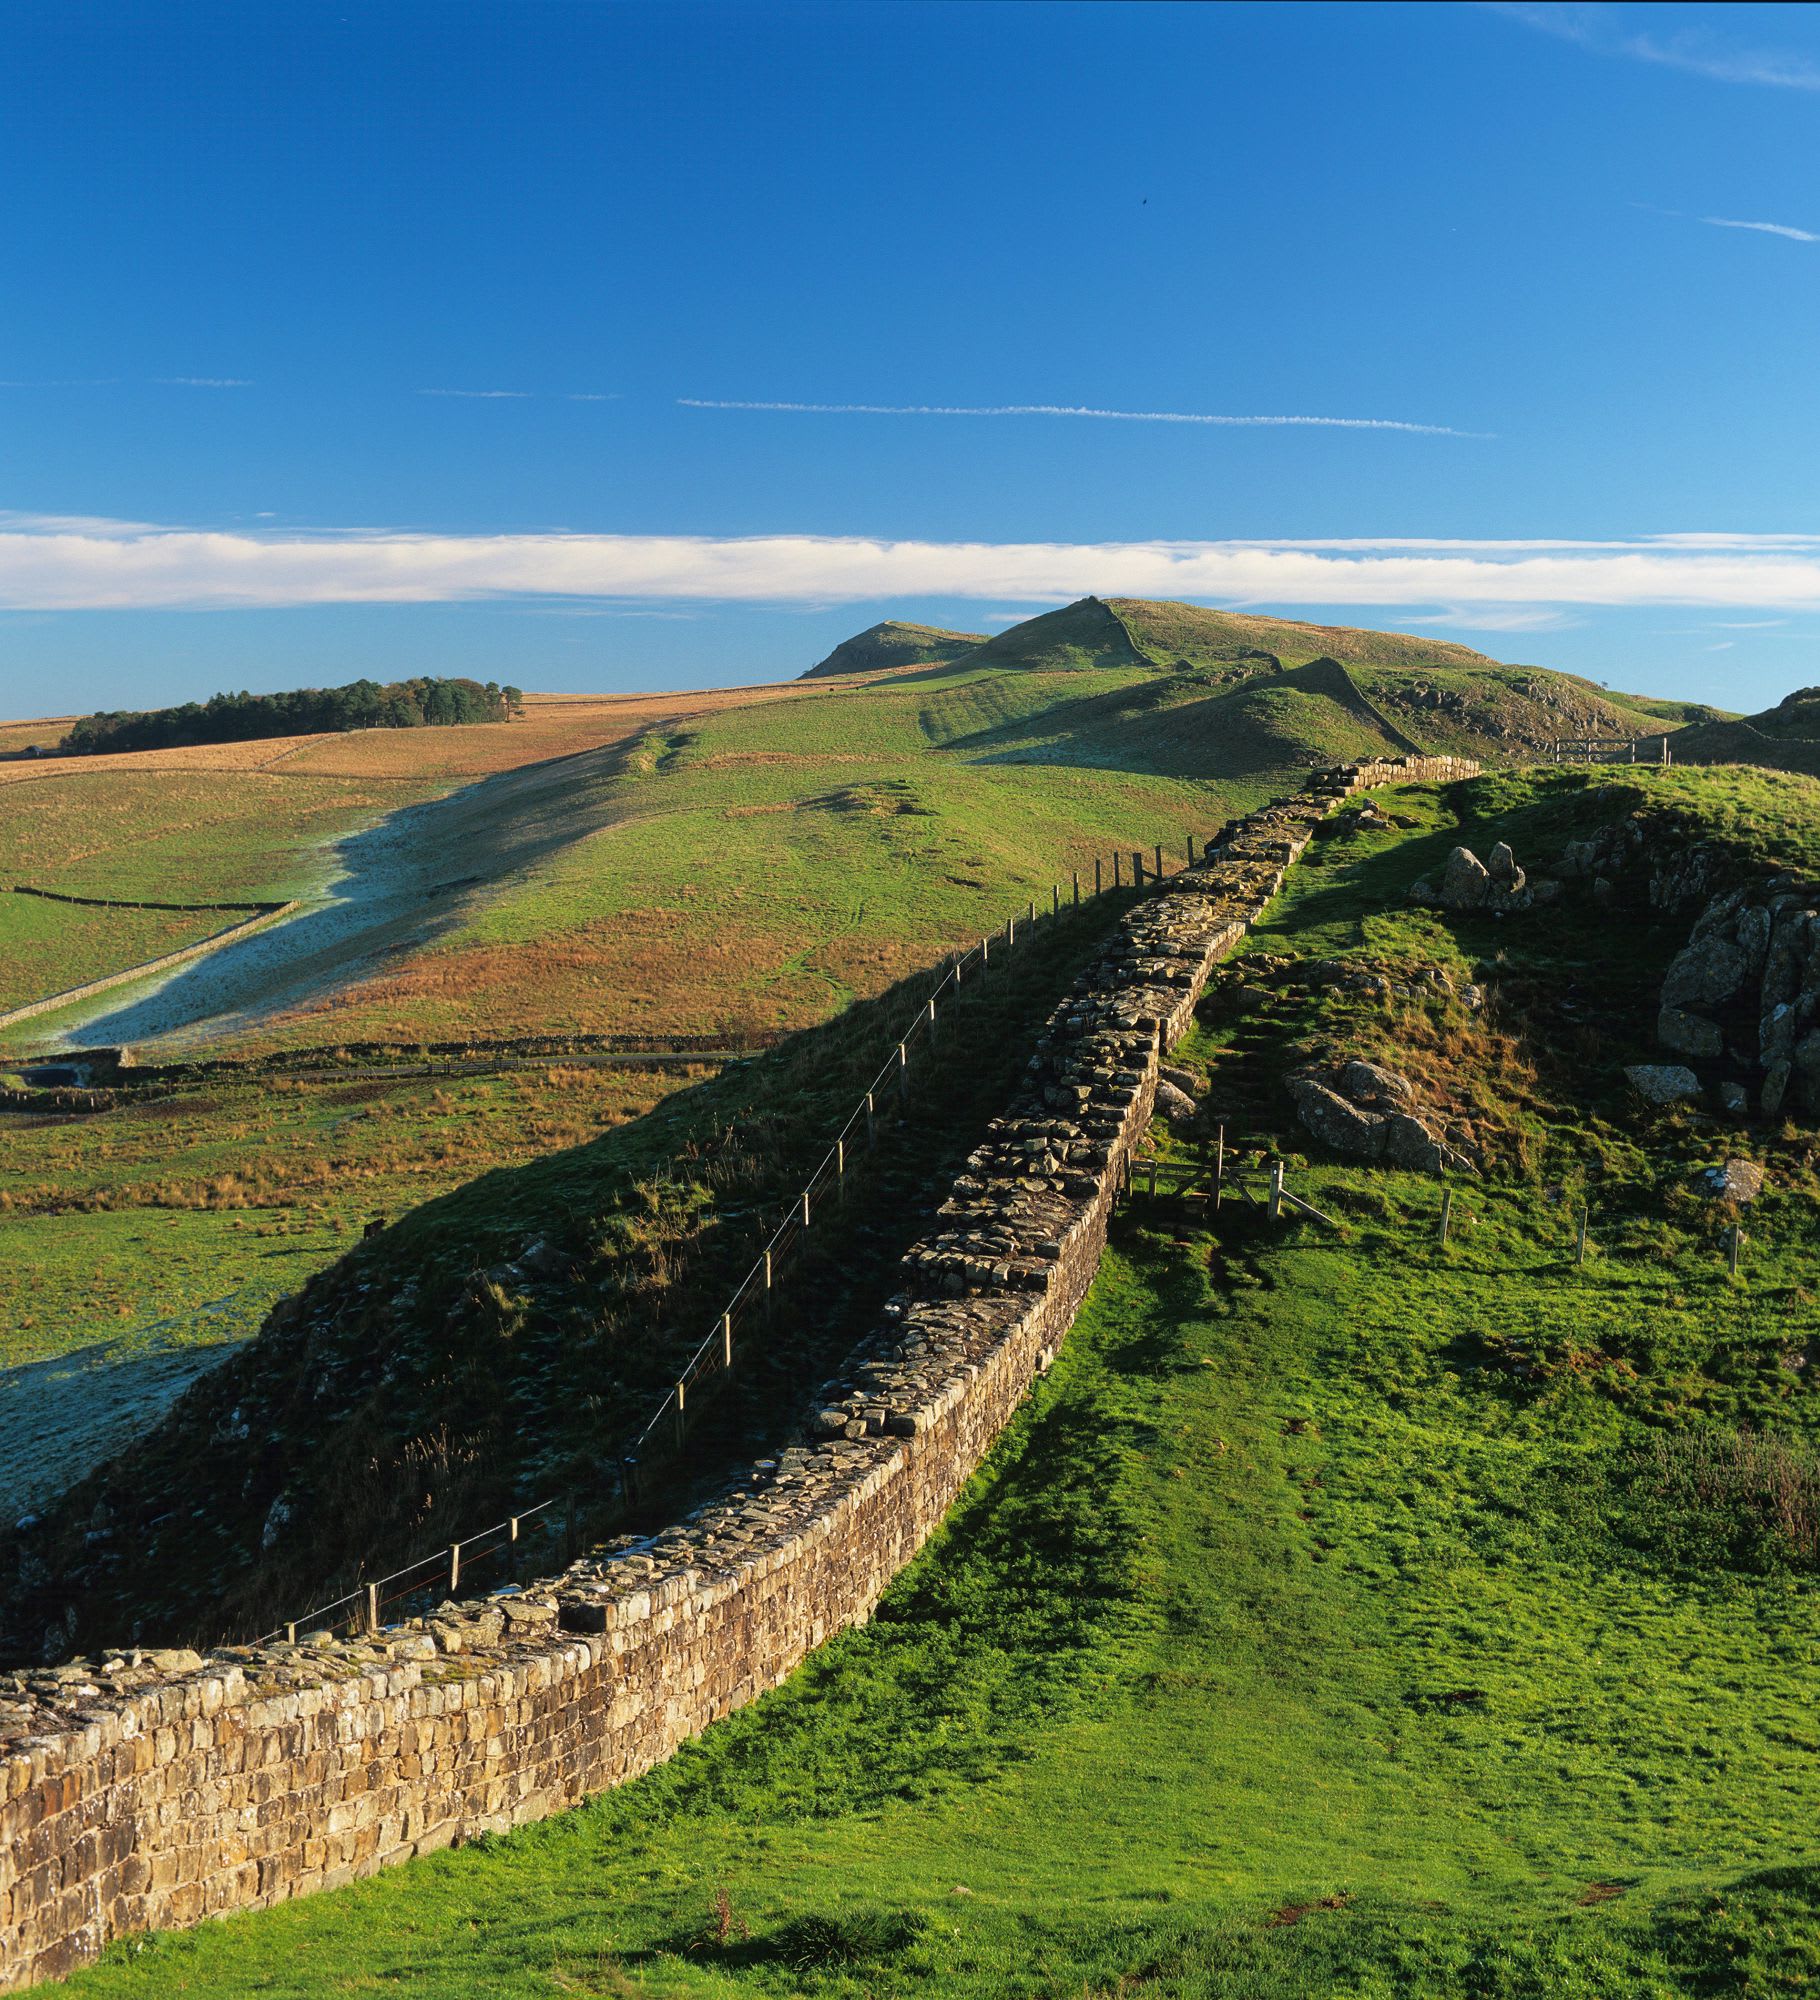 In AD122, Northumberland represented the farthest reaches of the Roman Empire under Emperor Hadrian.